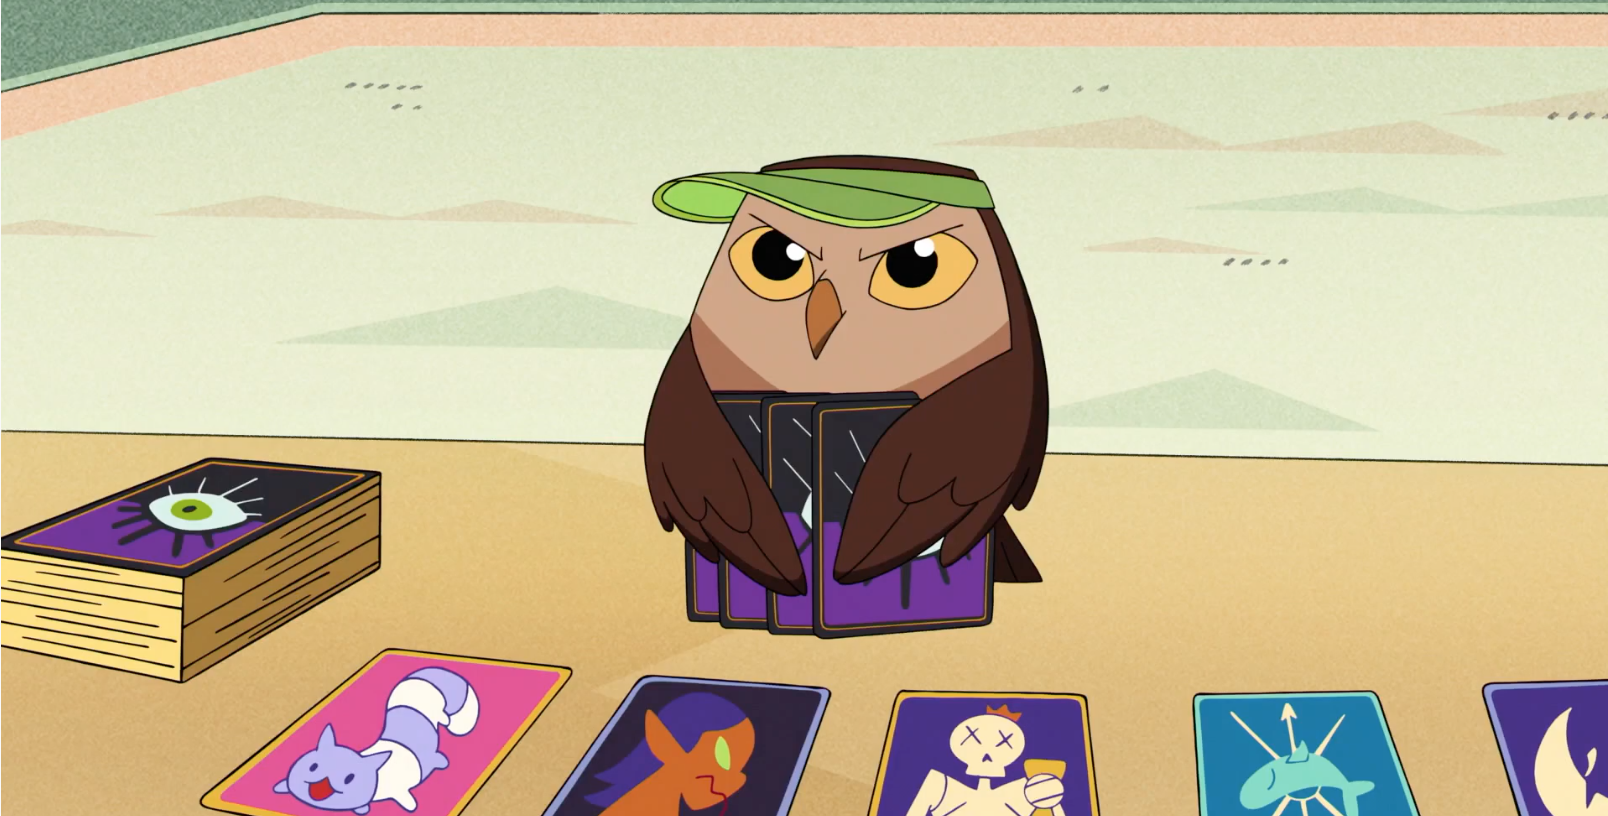 S01E06_Hooty%27s_Moving_Hassle_-_Owlbert_2.png